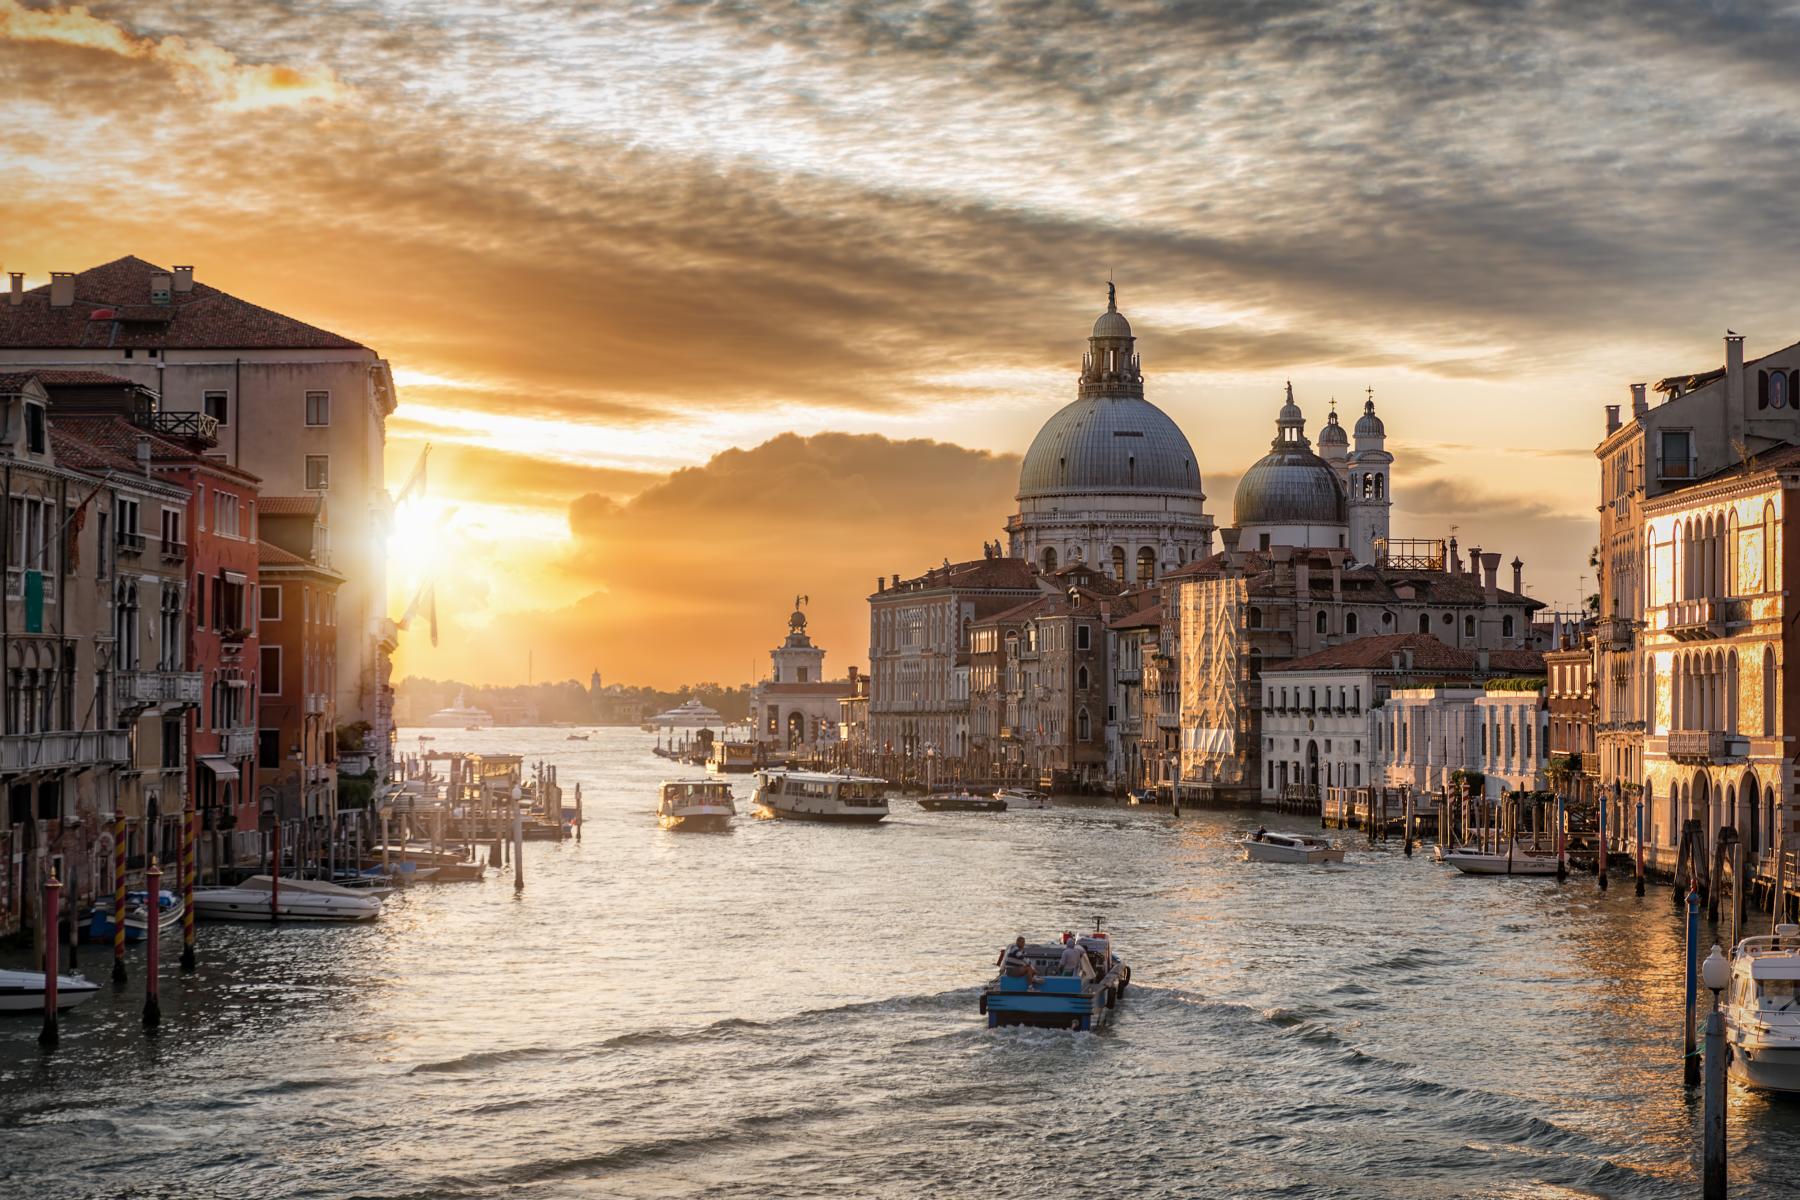 St Mark’s Square and other interesting attractions in Venice in 2023